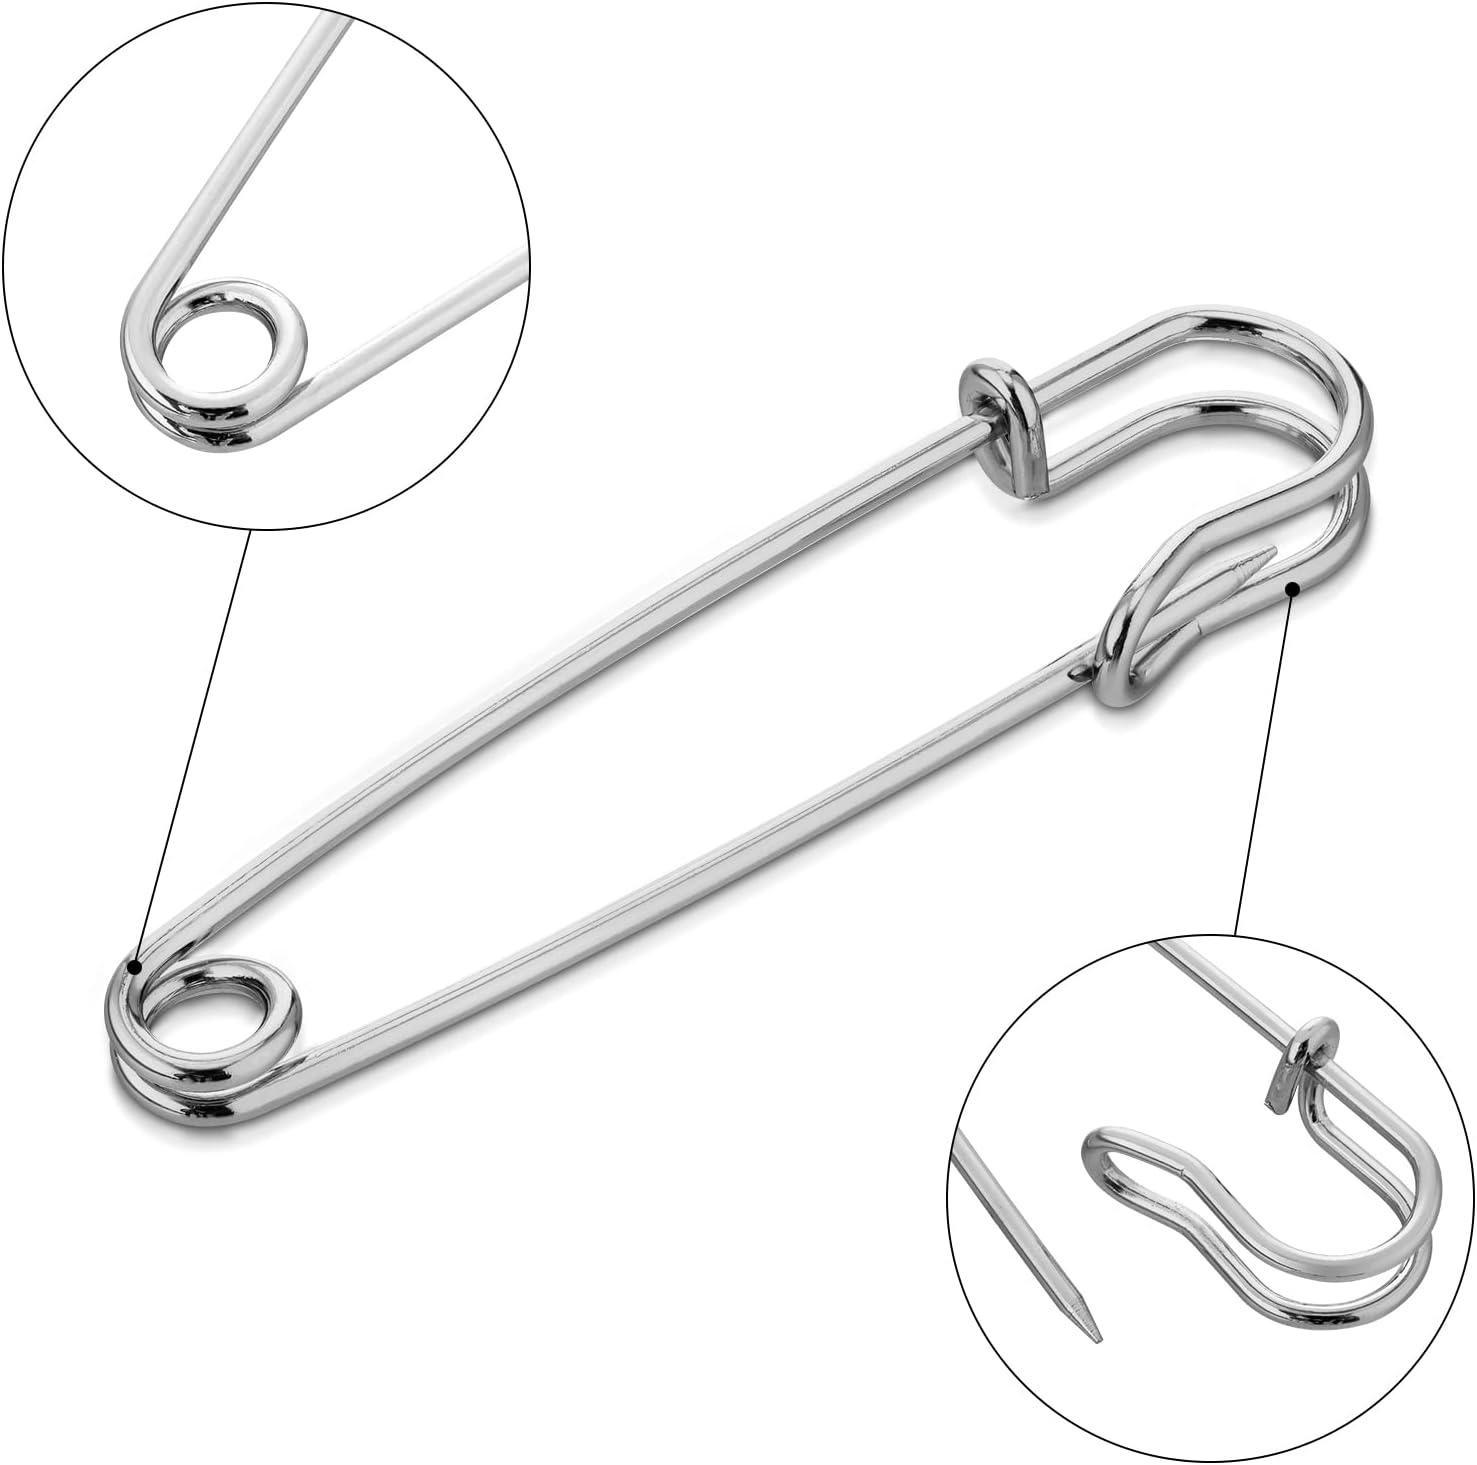 30 Pack Large Safety Pins Heavy Duty, 3 Assorted Sizes 1.78 2.75 4  Blanket Pins Bulk Steel Sturdy Pins Fasteners for Blankets Skirts Kilts  Crafts